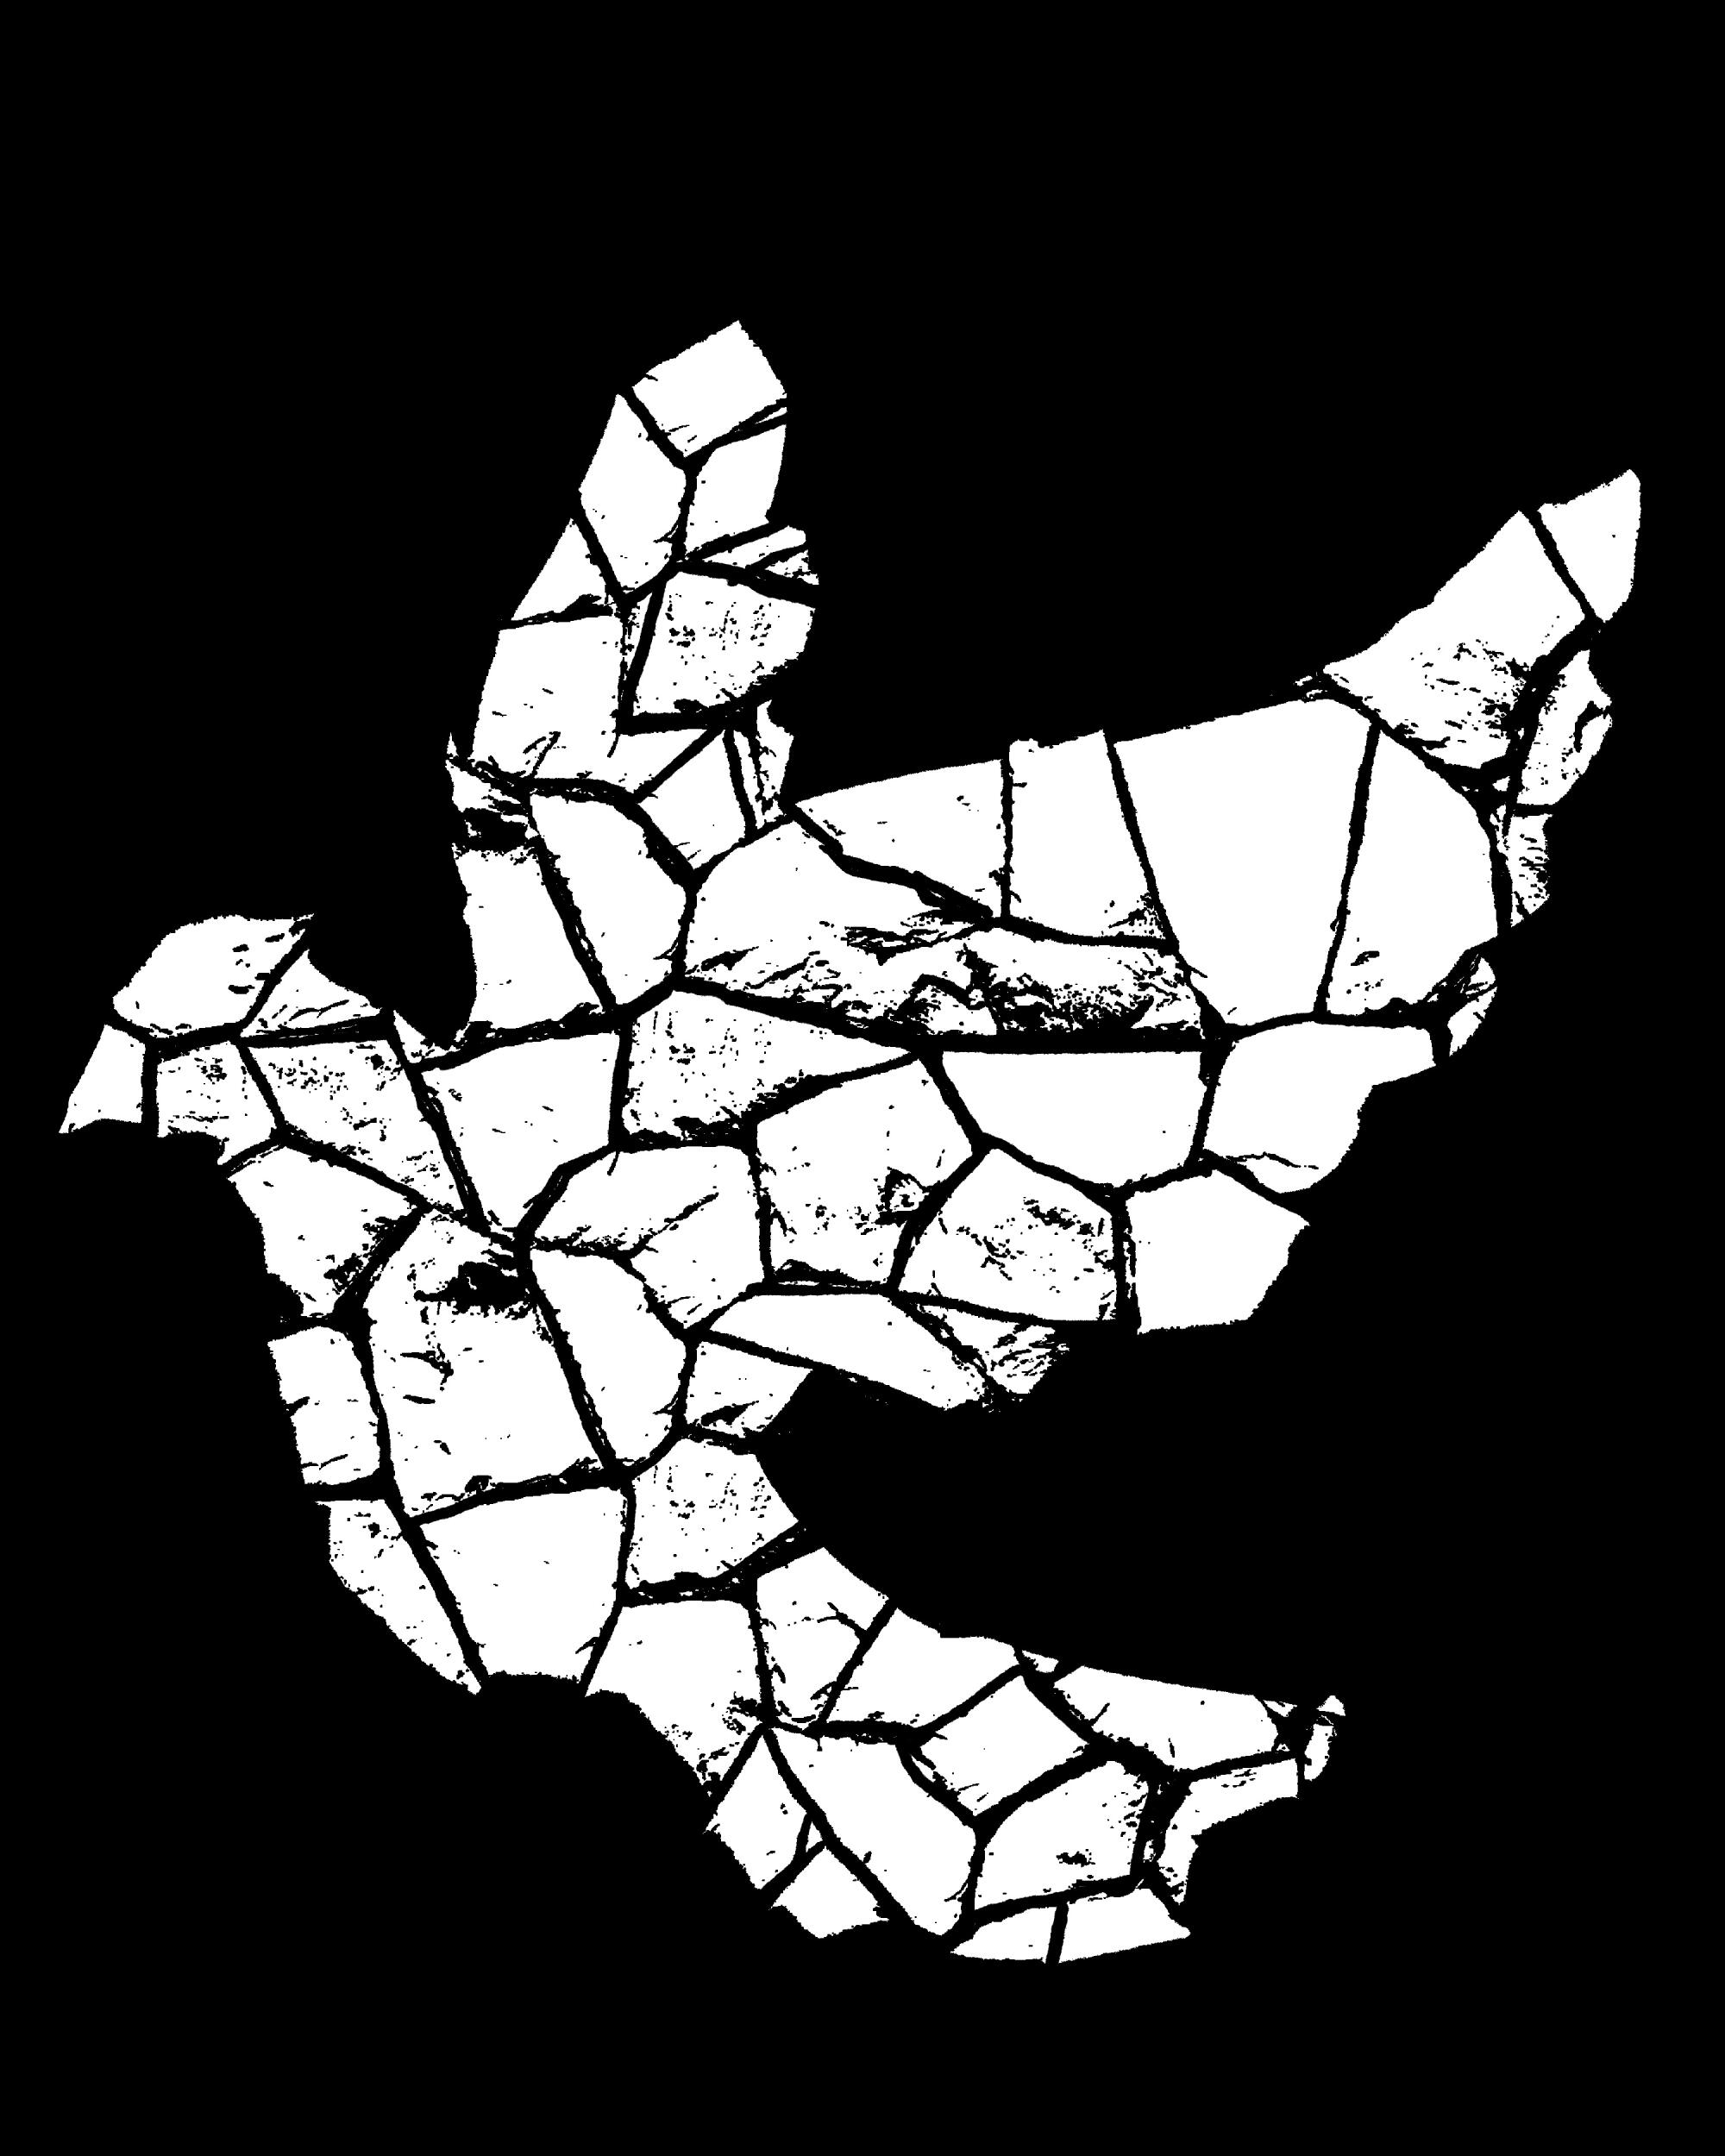 illustration of a white dove on black background with rubble texture